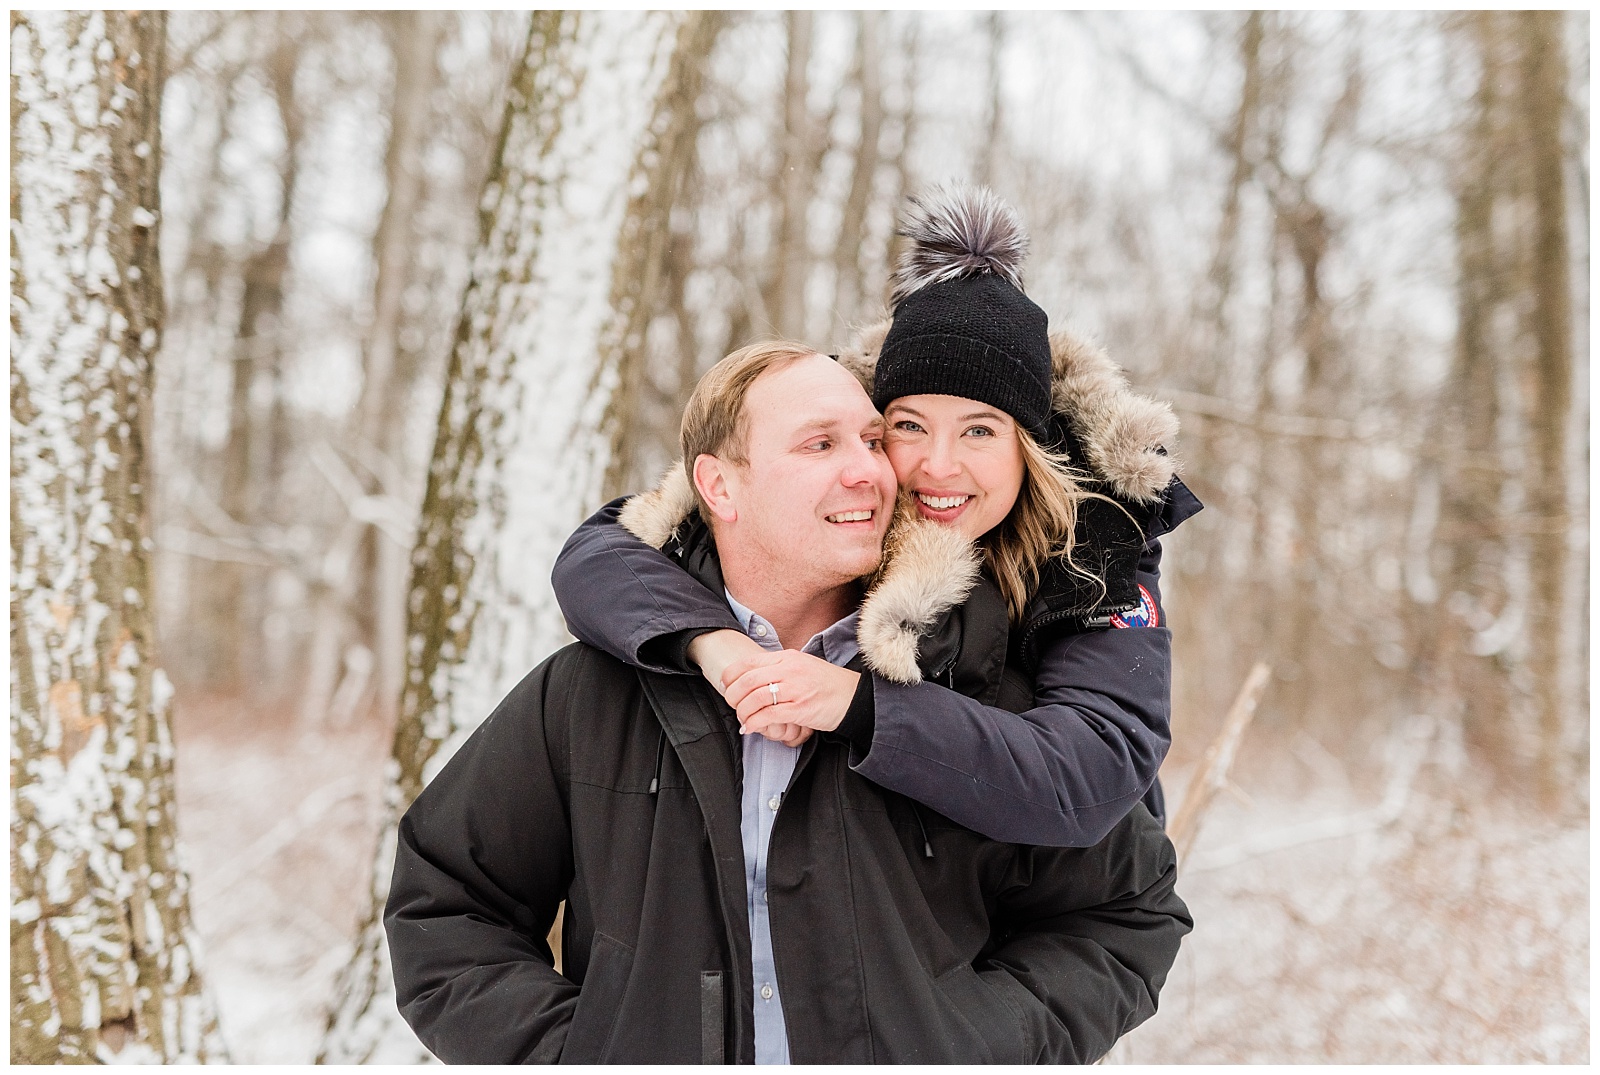 New Jersey Engagement Session, Snowy, Winter, Cozy, Session, Wedding Photographer, Cross Estate Gardens, Snow, Wintry, Light and Airy, Woods